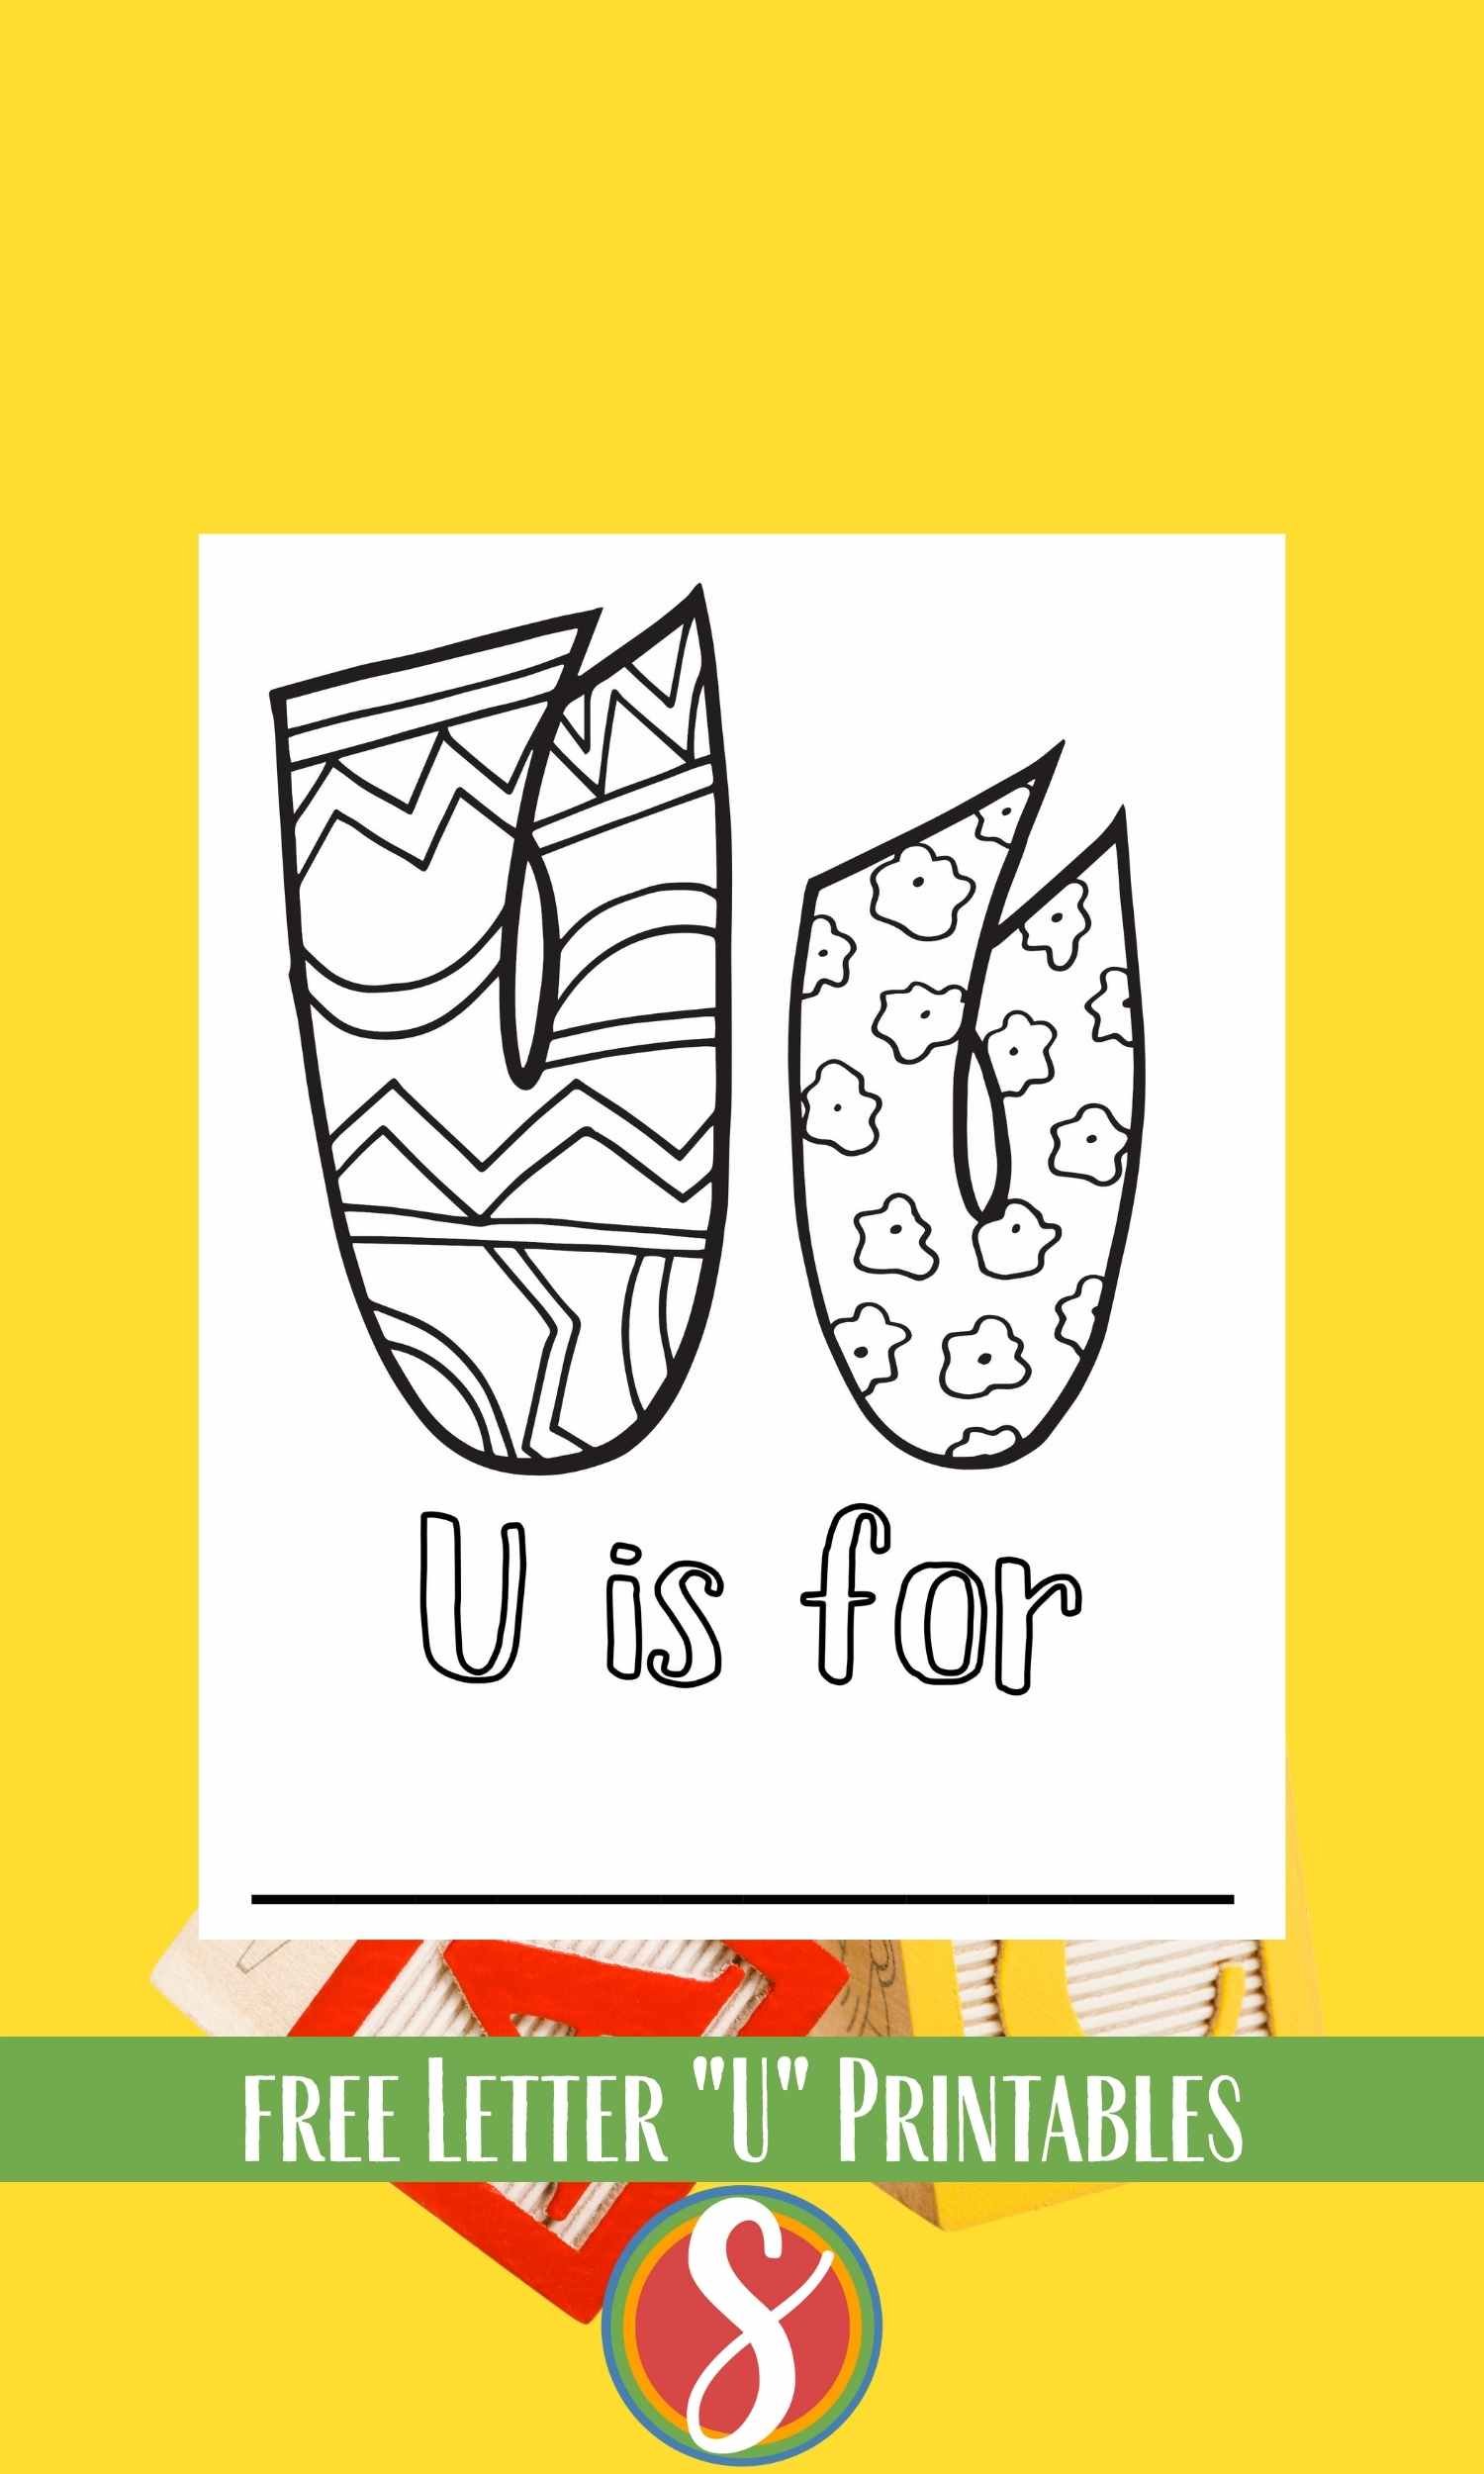 Bubble letters "Uu" with doodles inside to color